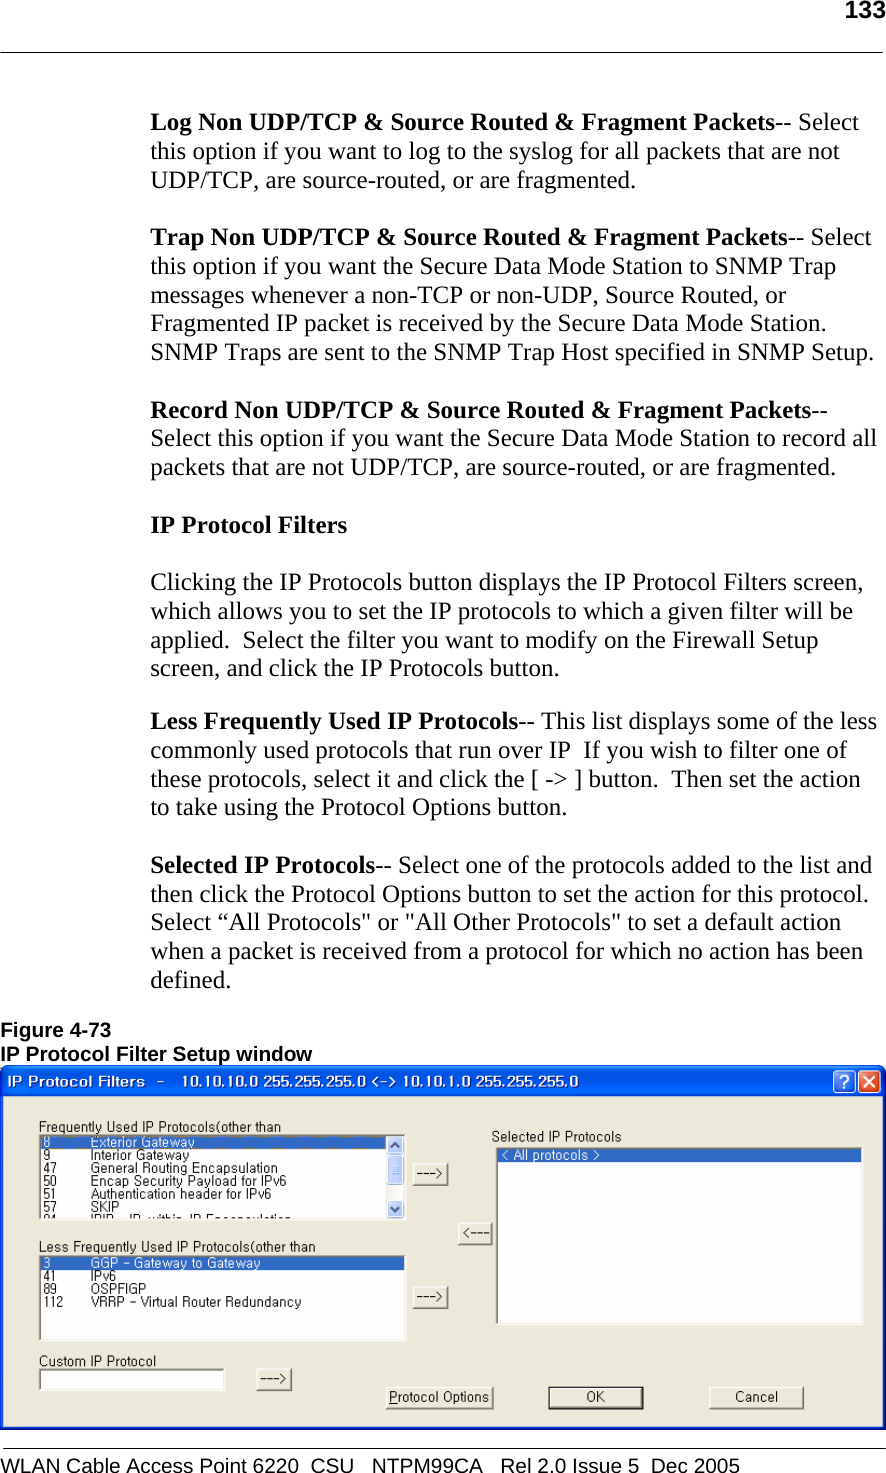   133  WLAN Cable Access Point 6220  CSU   NTPM99CA   Rel 2.0 Issue 5  Dec 2005 Log Non UDP/TCP &amp; Source Routed &amp; Fragment Packets-- Select this option if you want to log to the syslog for all packets that are not UDP/TCP, are source-routed, or are fragmented.  Trap Non UDP/TCP &amp; Source Routed &amp; Fragment Packets-- Select this option if you want the Secure Data Mode Station to SNMP Trap messages whenever a non-TCP or non-UDP, Source Routed, or Fragmented IP packet is received by the Secure Data Mode Station. SNMP Traps are sent to the SNMP Trap Host specified in SNMP Setup.  Record Non UDP/TCP &amp; Source Routed &amp; Fragment Packets-- Select this option if you want the Secure Data Mode Station to record all packets that are not UDP/TCP, are source-routed, or are fragmented.  IP Protocol Filters   Clicking the IP Protocols button displays the IP Protocol Filters screen, which allows you to set the IP protocols to which a given filter will be applied.  Select the filter you want to modify on the Firewall Setup screen, and click the IP Protocols button.  Less Frequently Used IP Protocols-- This list displays some of the less commonly used protocols that run over IP  If you wish to filter one of these protocols, select it and click the [ -&gt; ] button.  Then set the action to take using the Protocol Options button.  Selected IP Protocols-- Select one of the protocols added to the list and then click the Protocol Options button to set the action for this protocol.  Select “All Protocols&quot; or &quot;All Other Protocols&quot; to set a default action when a packet is received from a protocol for which no action has been defined.    Figure 4-73 IP Protocol Filter Setup window  